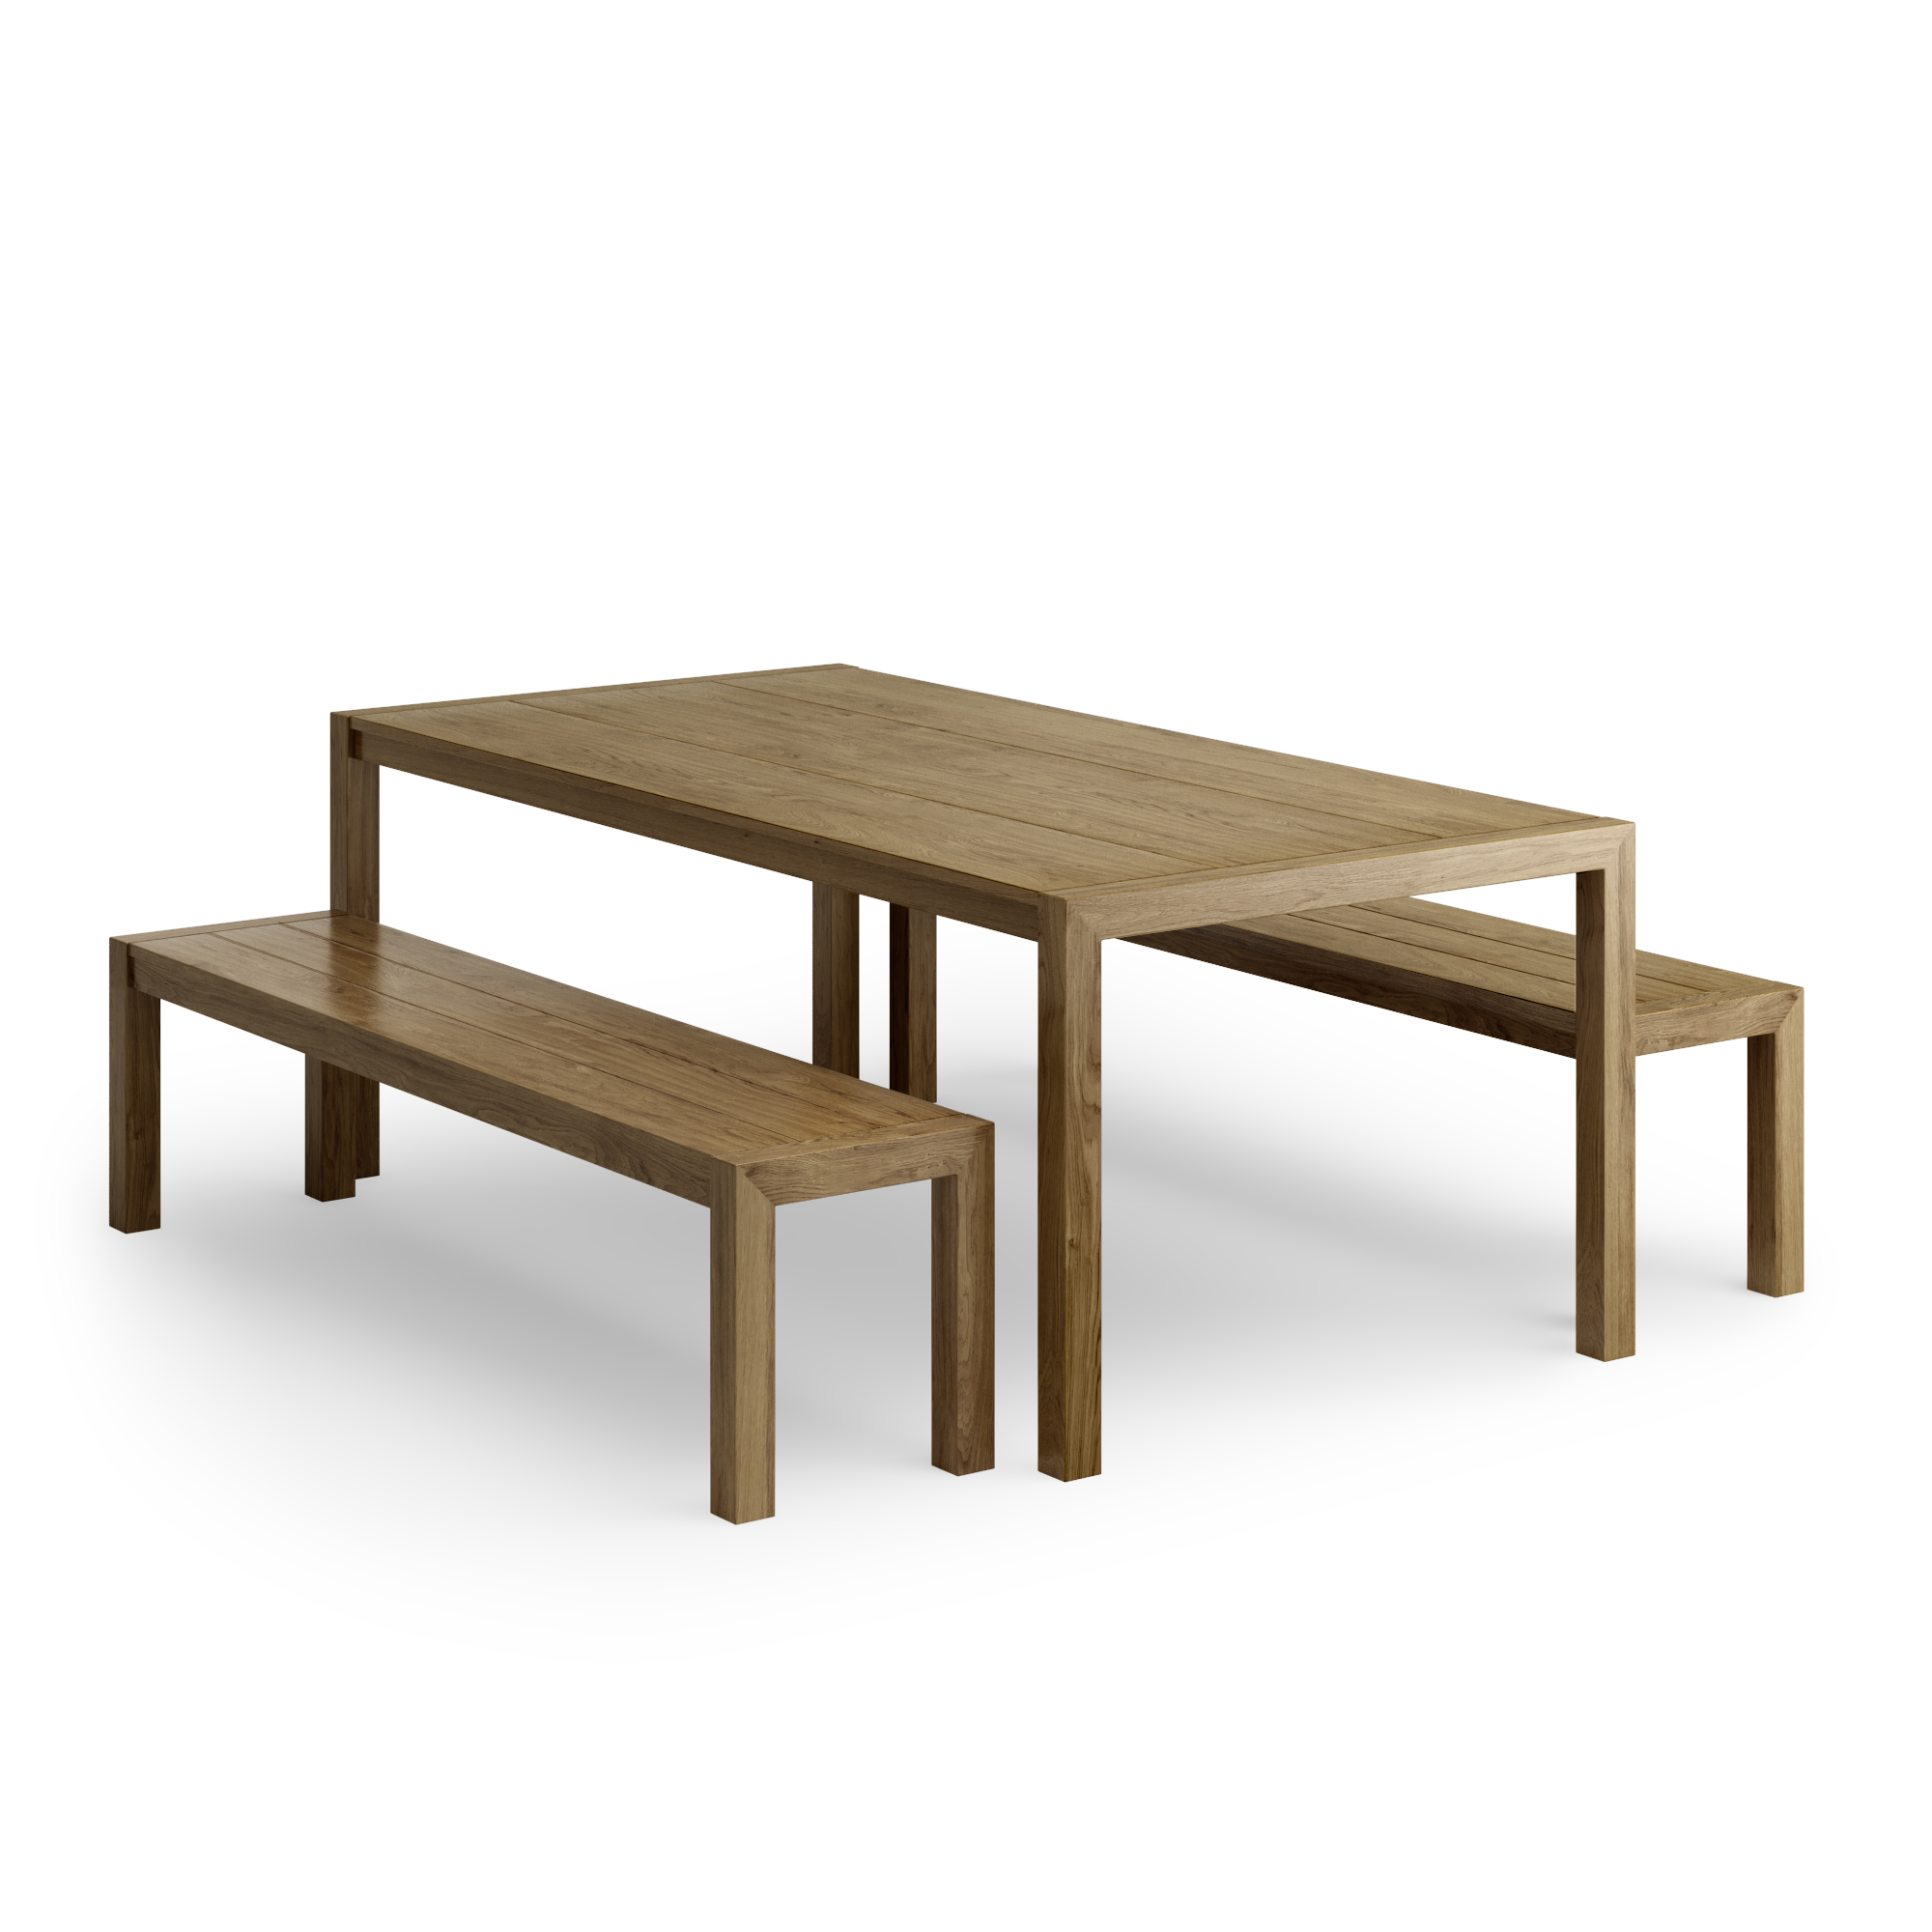 Brodie Table and Bench Seats